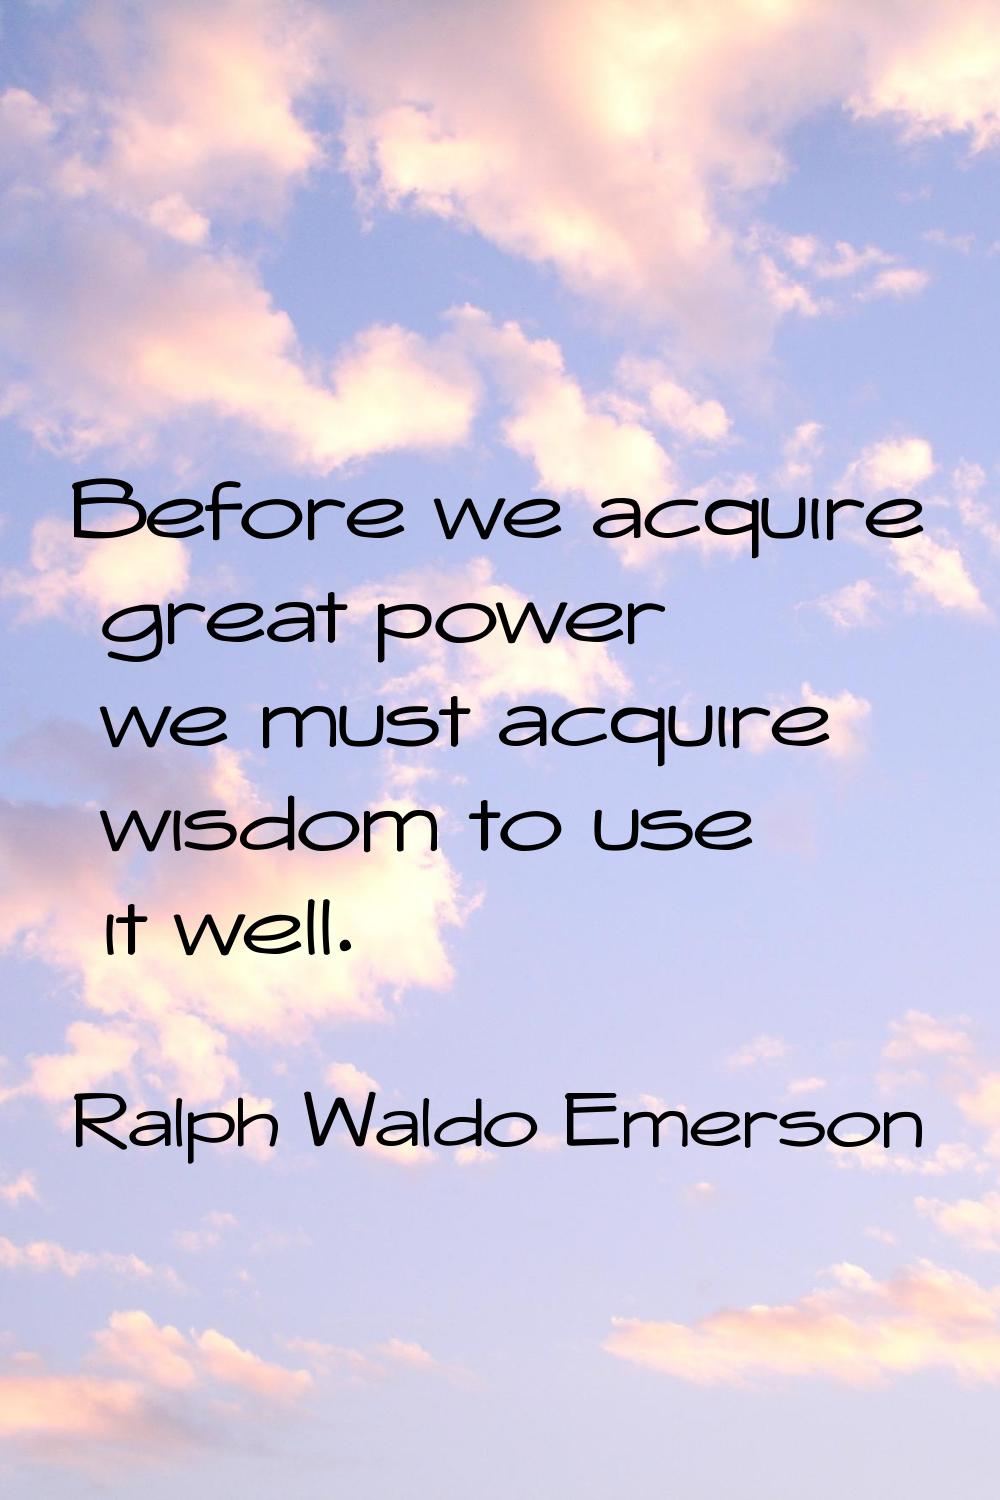 Before we acquire great power we must acquire wisdom to use it well.